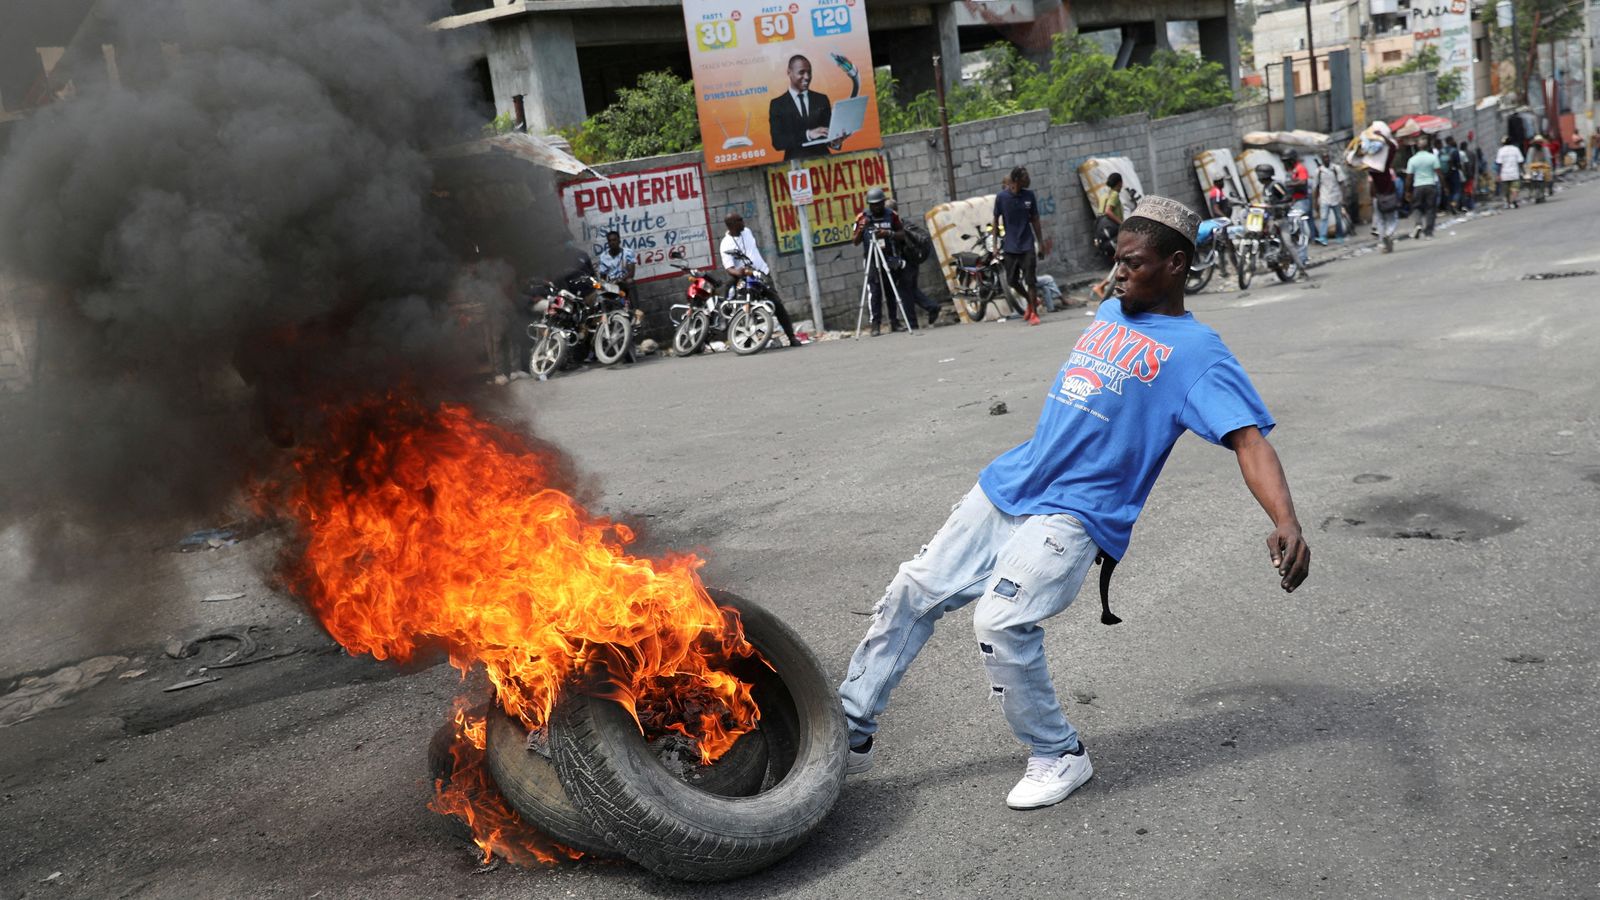 Haiti gang violence: UK warns against all travel to Caribbean nation as US secretary of state tries to solve crisis